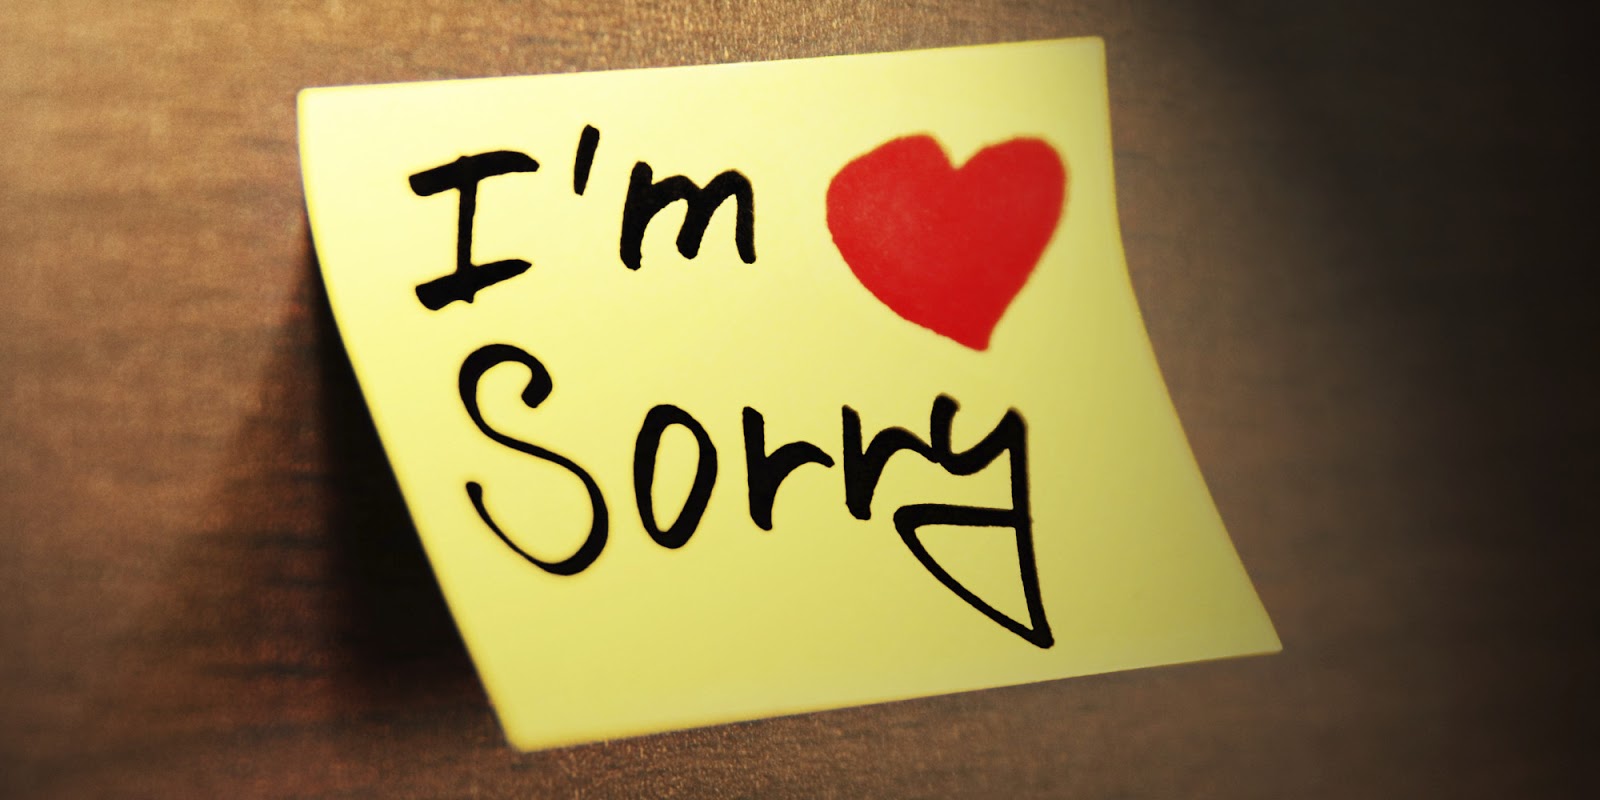 How To Apologize To Someone You Hurt Deeply Legit Ng